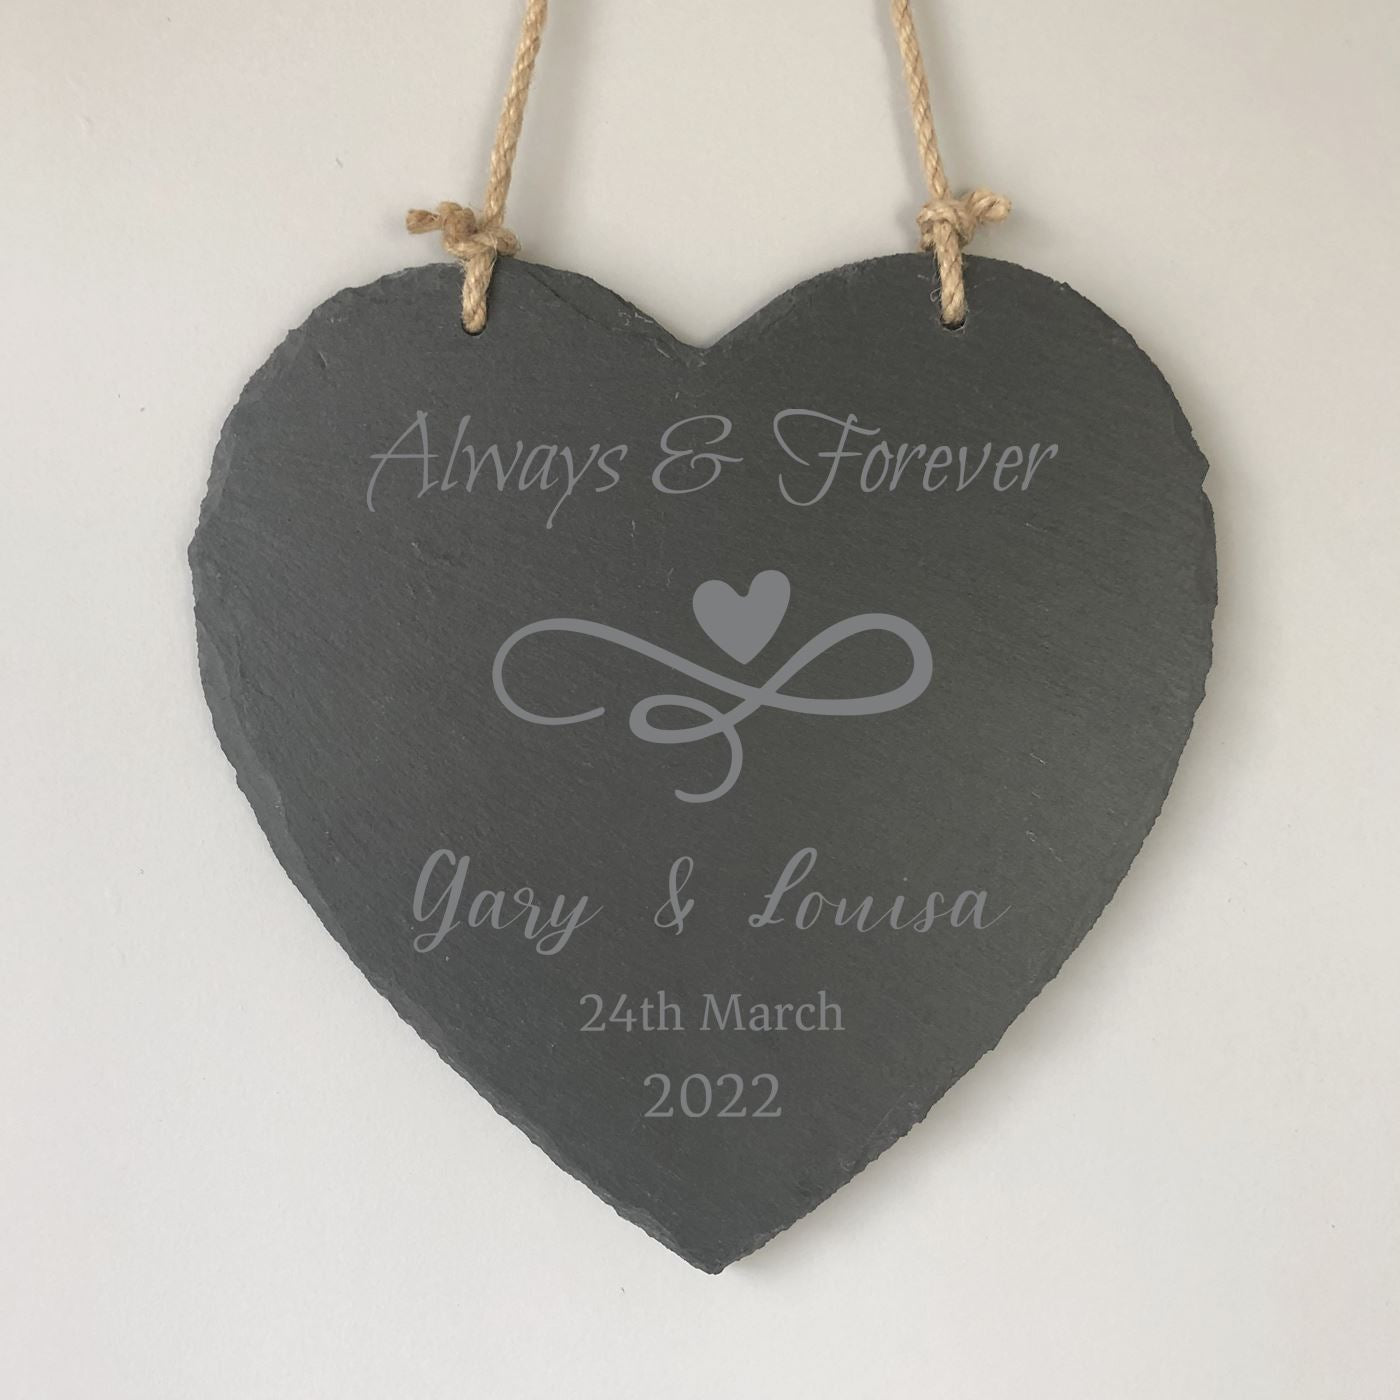 Personalised Slate Heart Plaque - Always & Forever